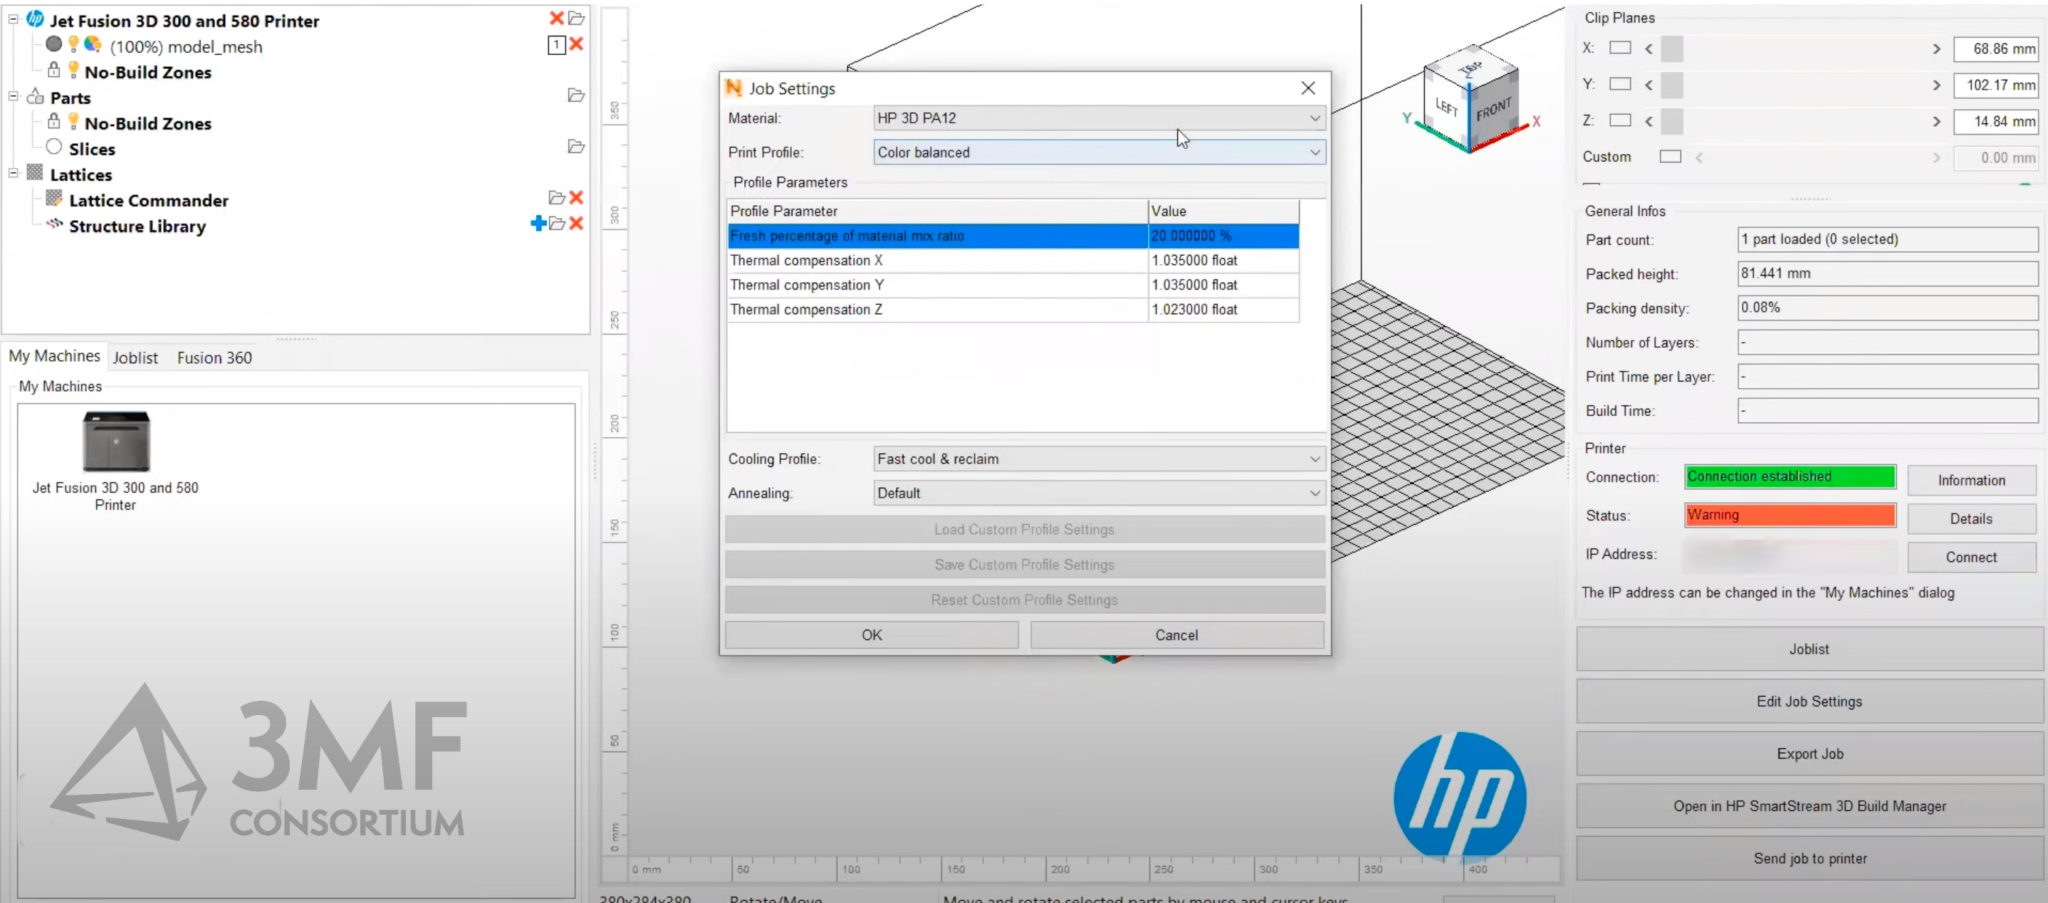 Direct Export from Netfabb to HP MJF 3D Printing with 3MF (Video)